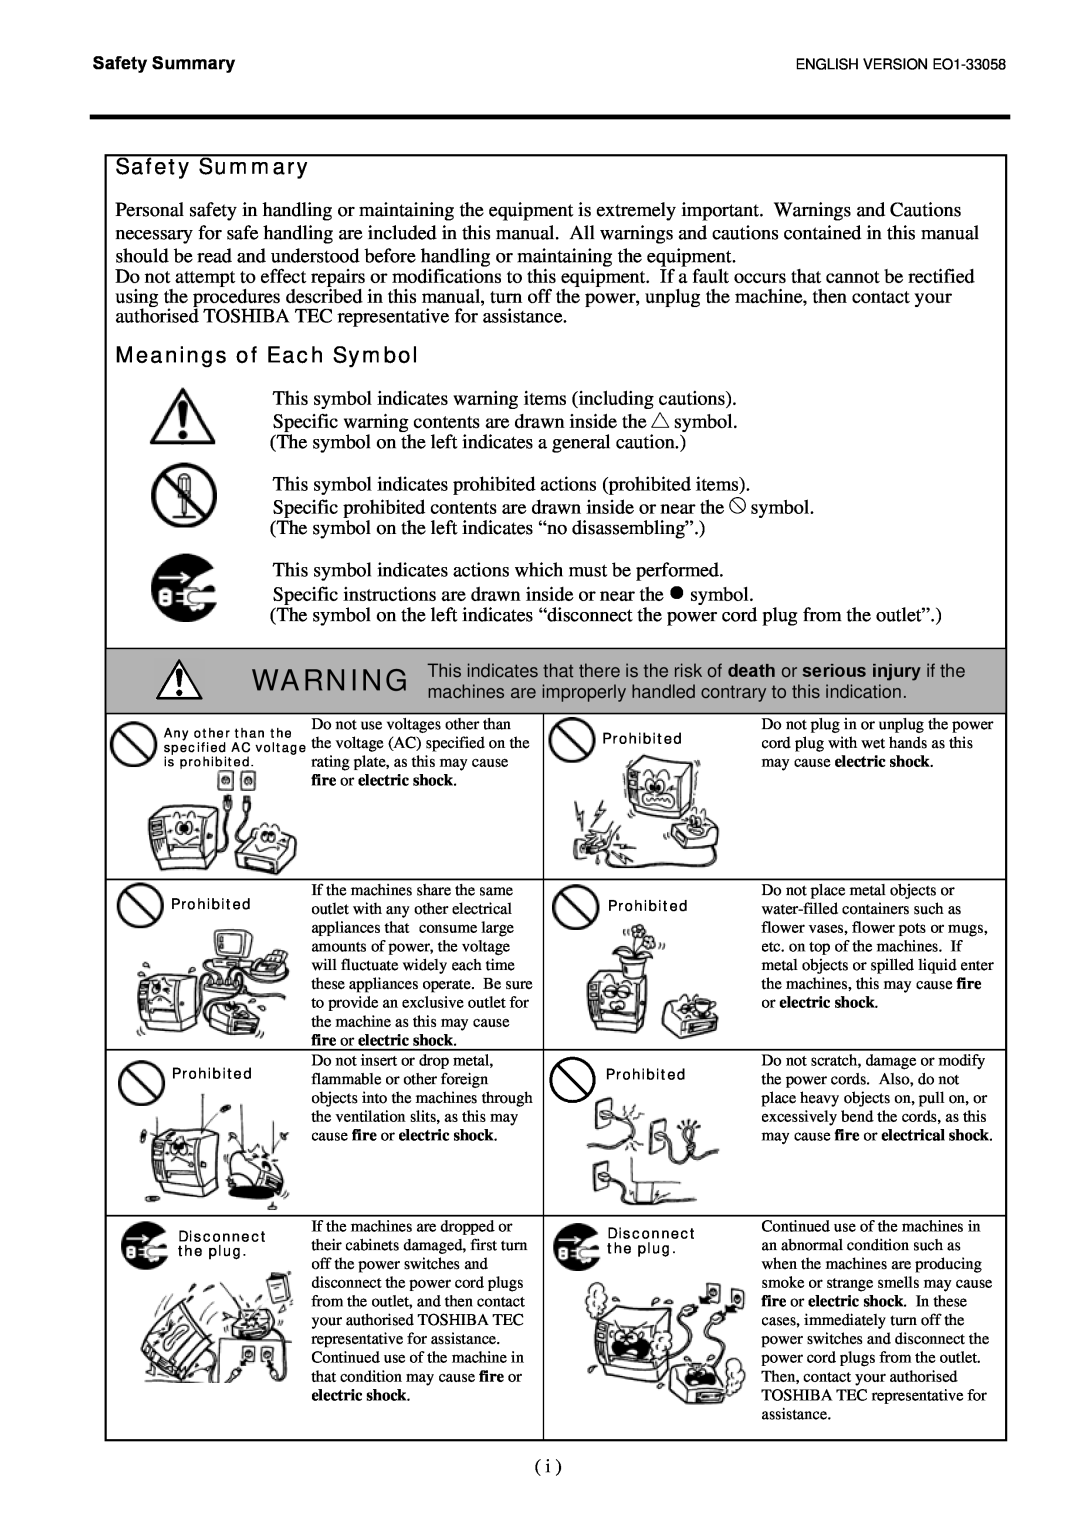 Toshiba B-SX4T owner manual Safety Summary, Meanings of Each Symbol 